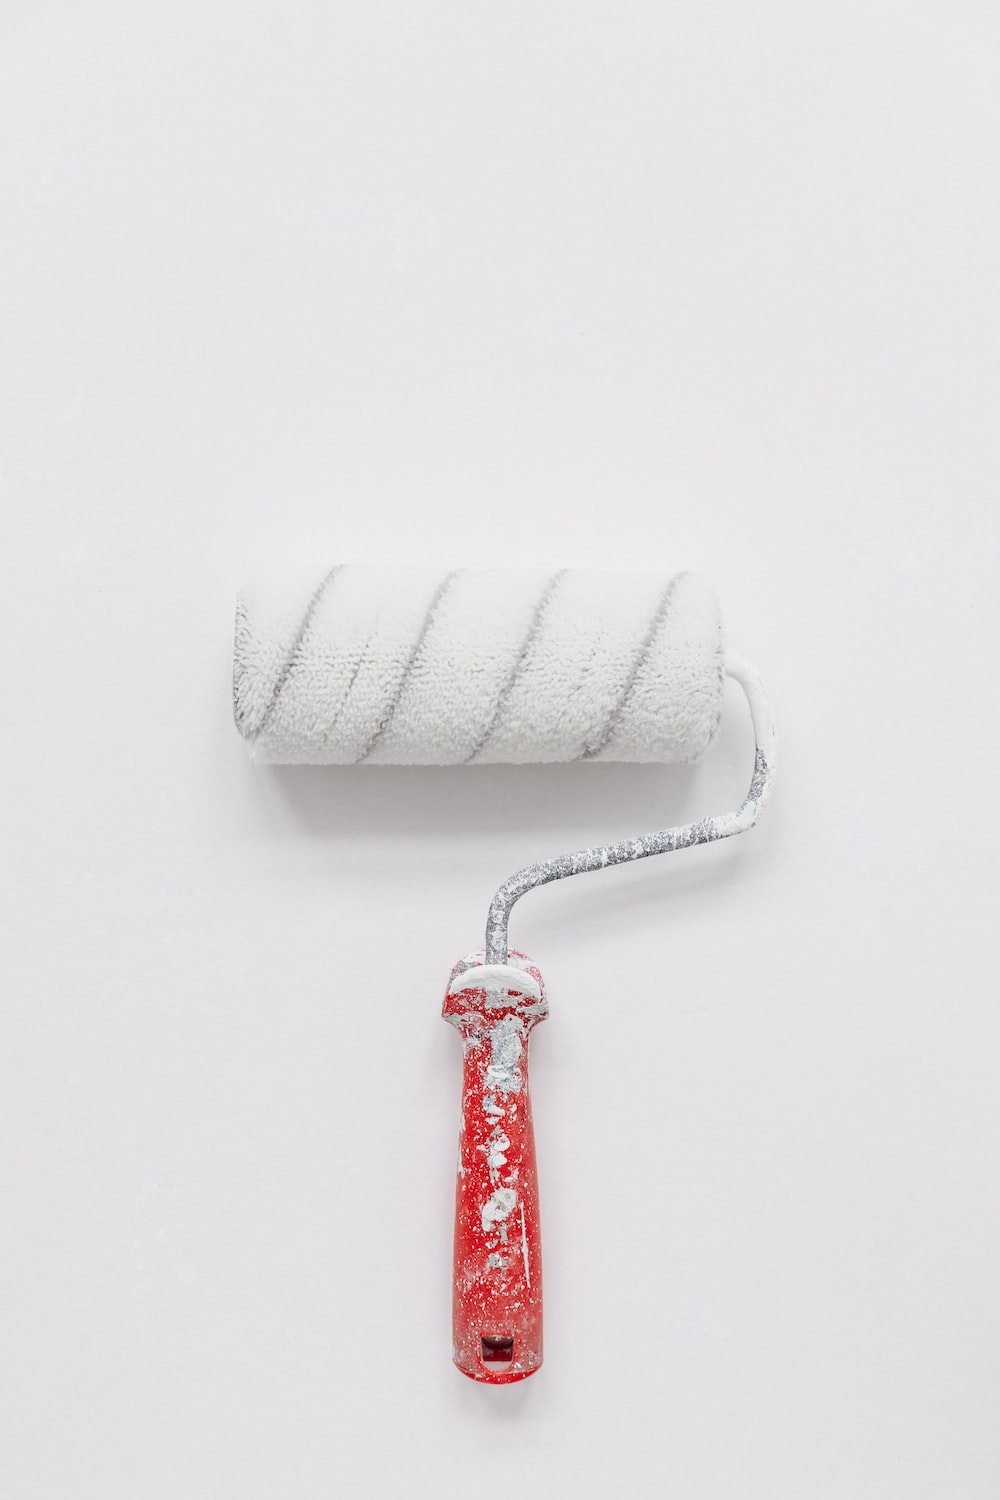 a white paint roller.